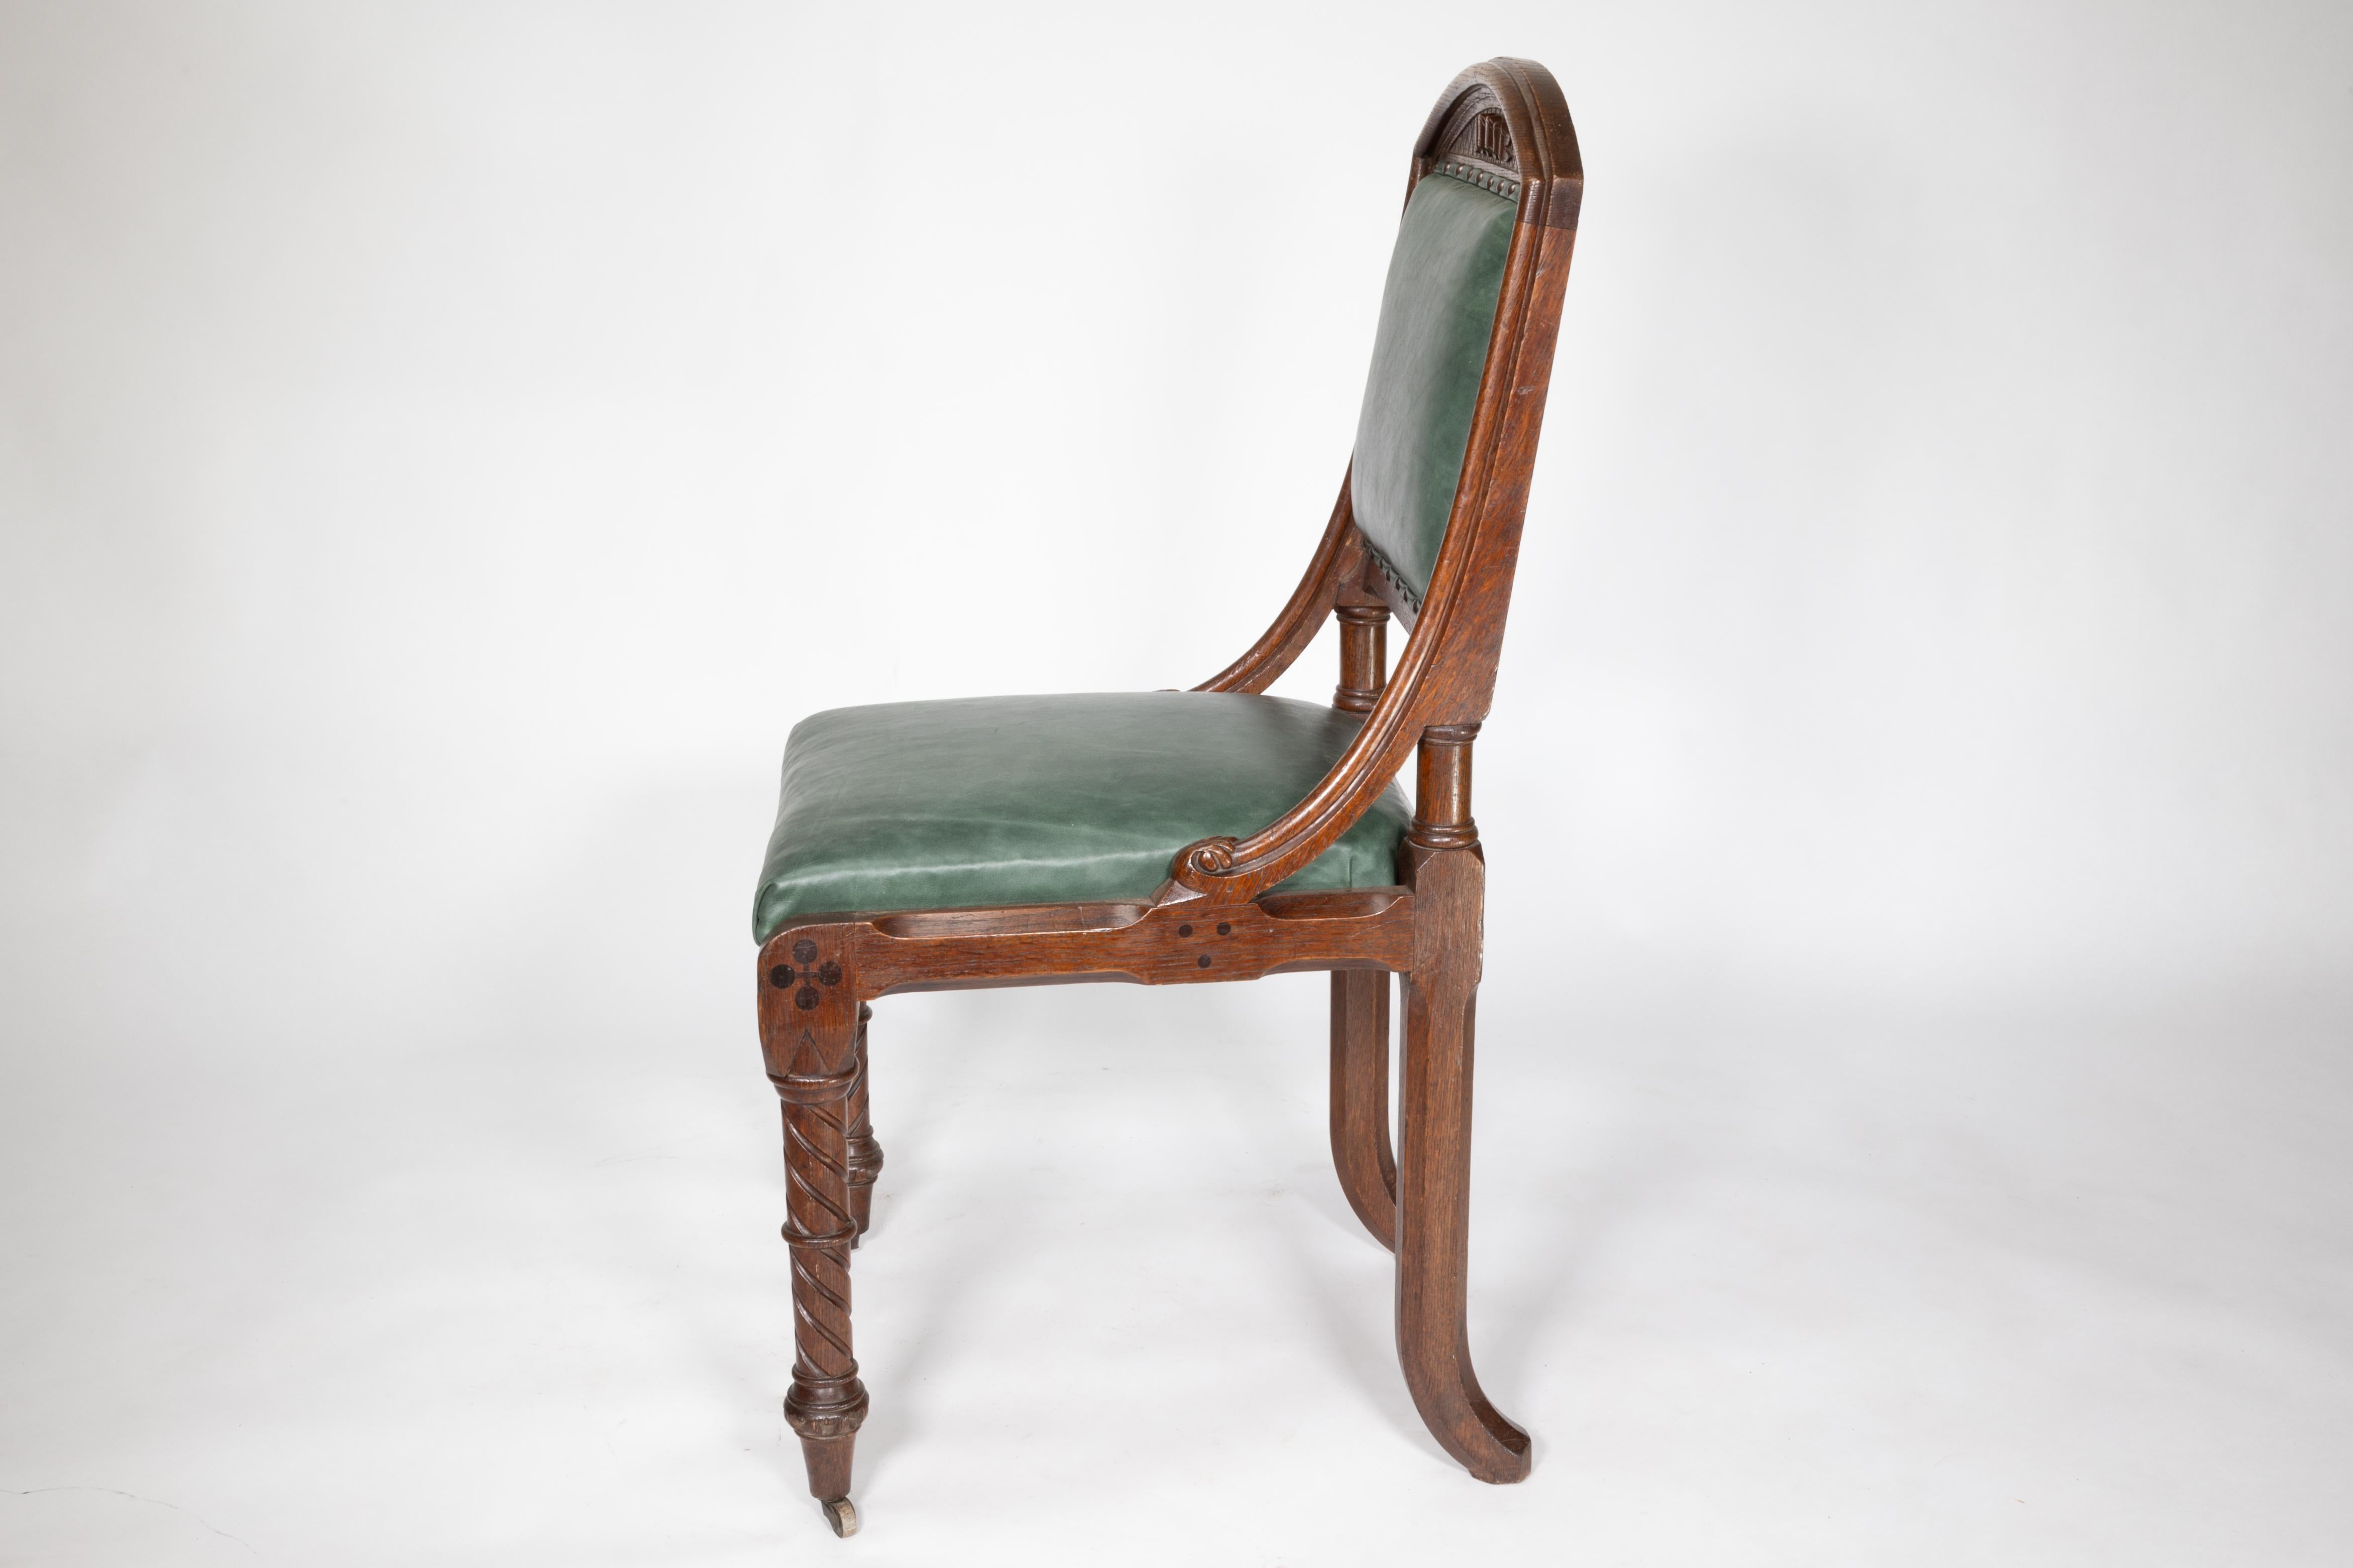 Late 19th Century John Pollard Seddon (attributed). A Gothic Revival Oak Side or Desk Chair For Sale